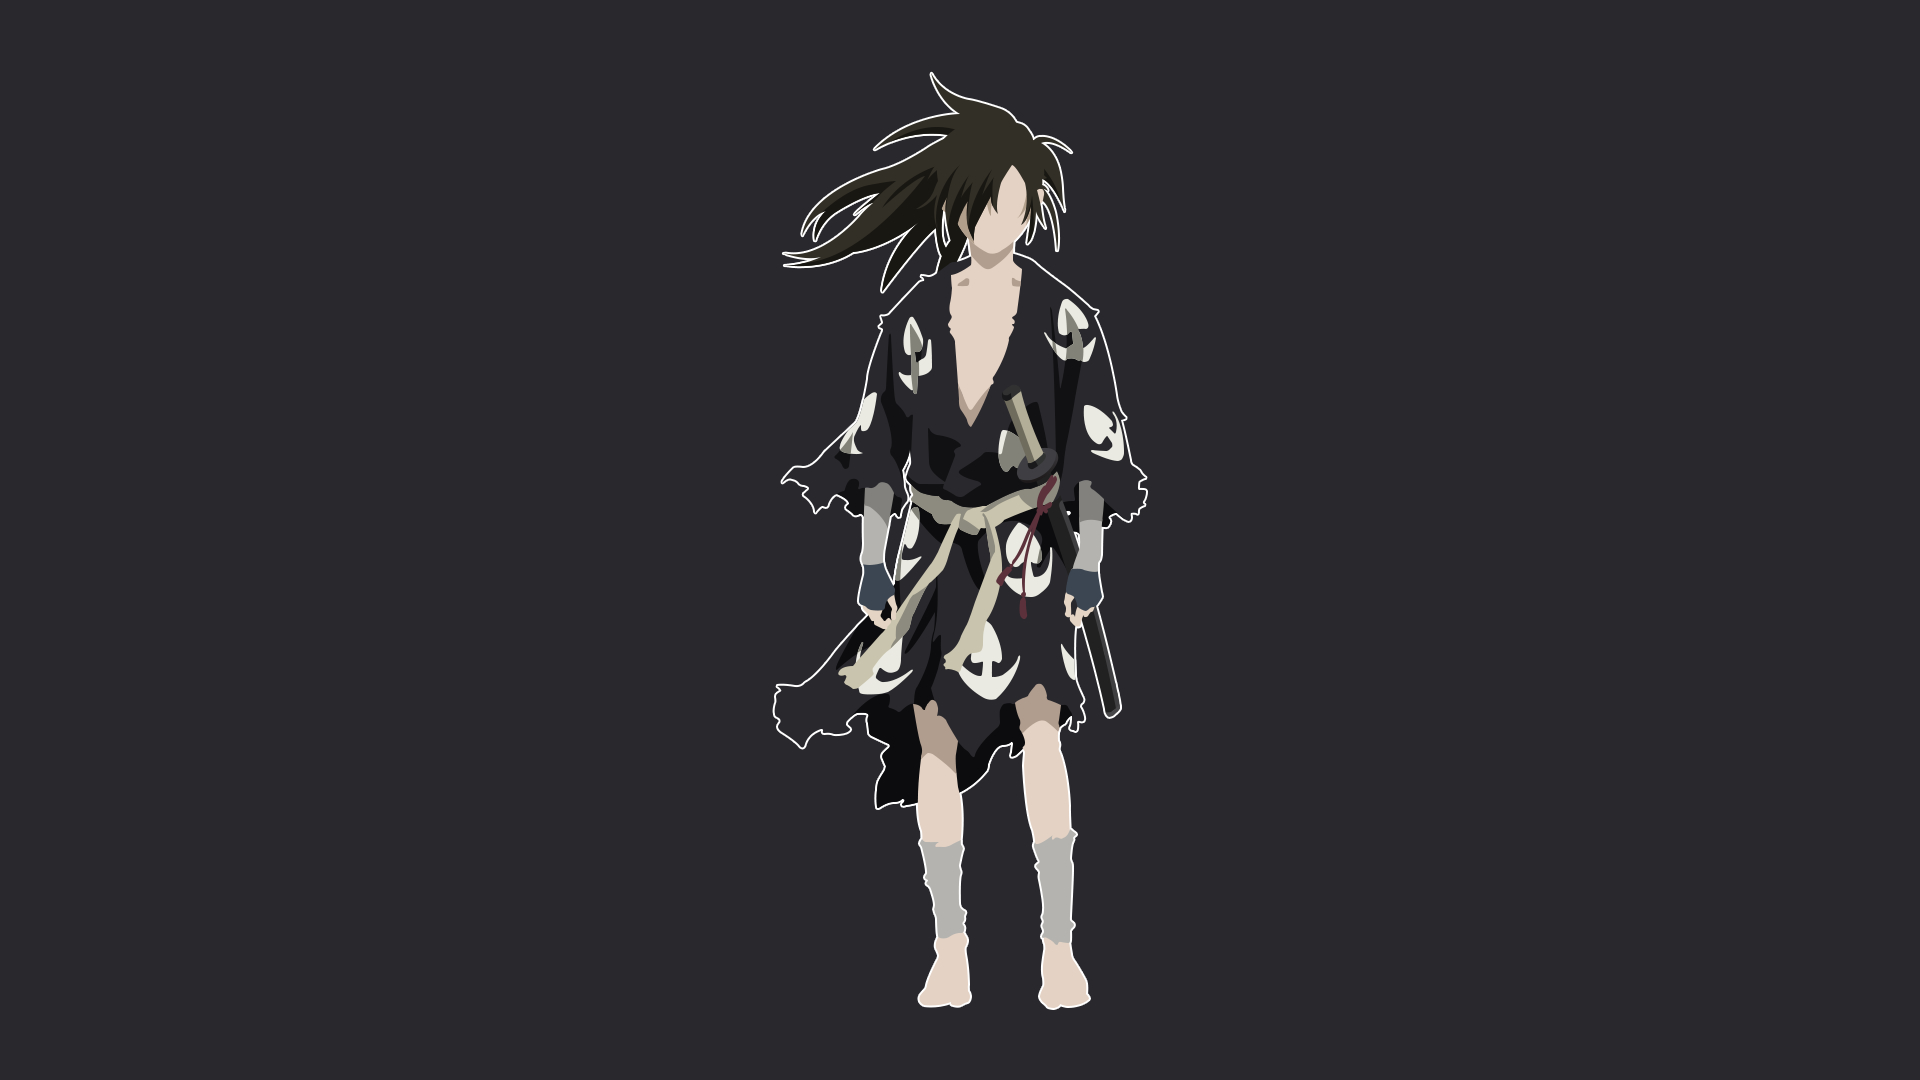 Hyakkimaru From Dororo Wallpaper Hd Anime 4k Wallpapers Images Photos And Background Wallpapers Den